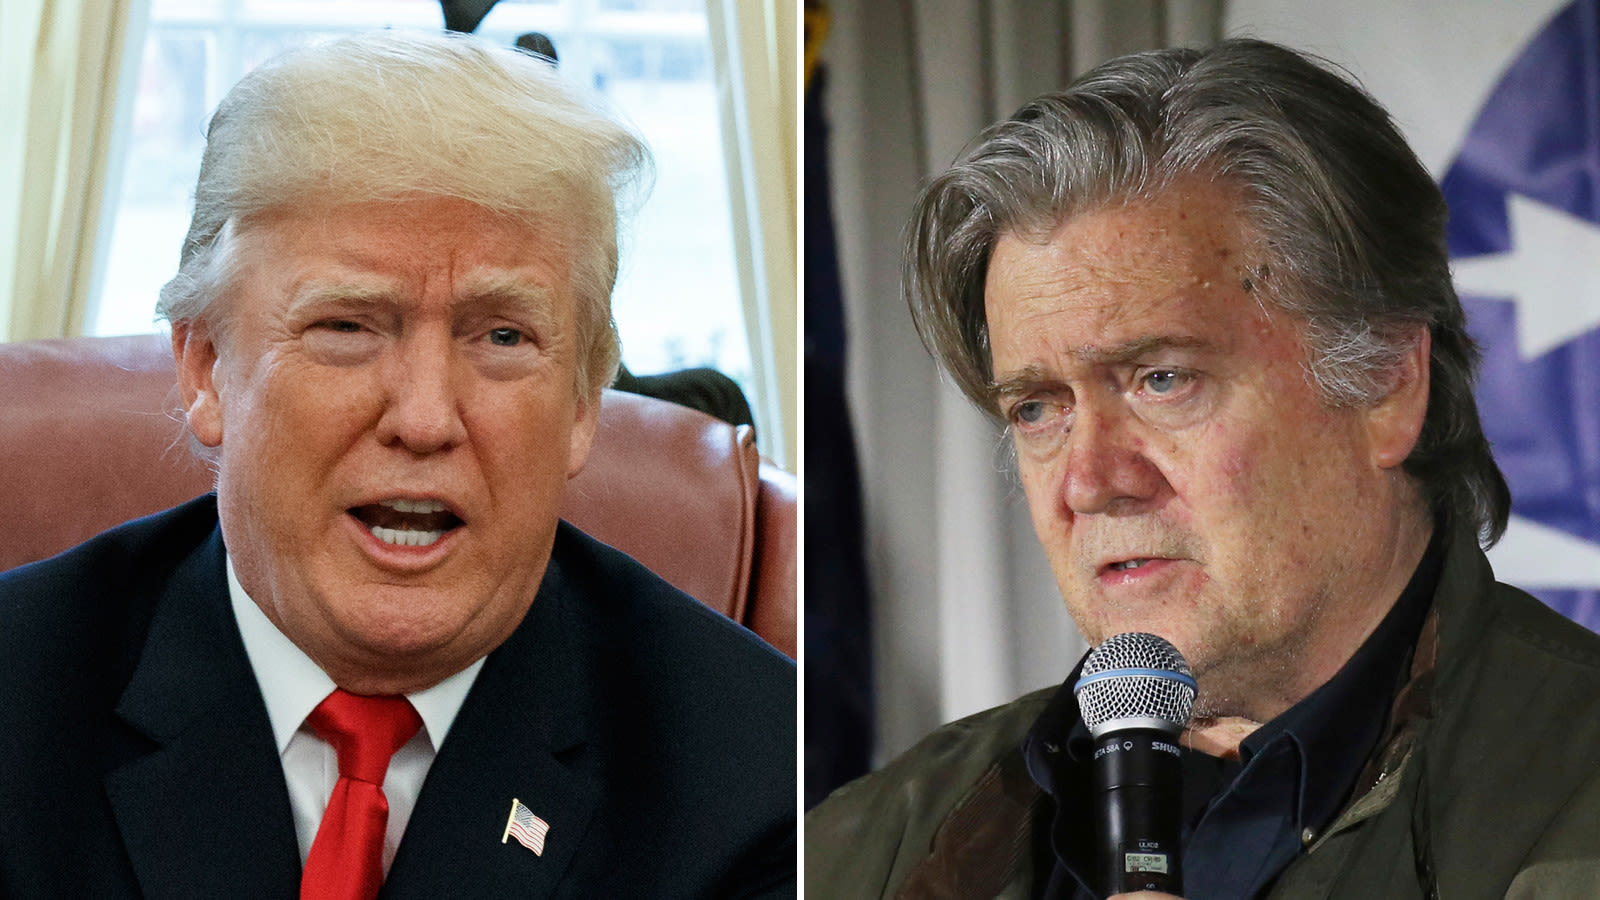 Trump ally Bannon must surrender to prison by July 1, judge says